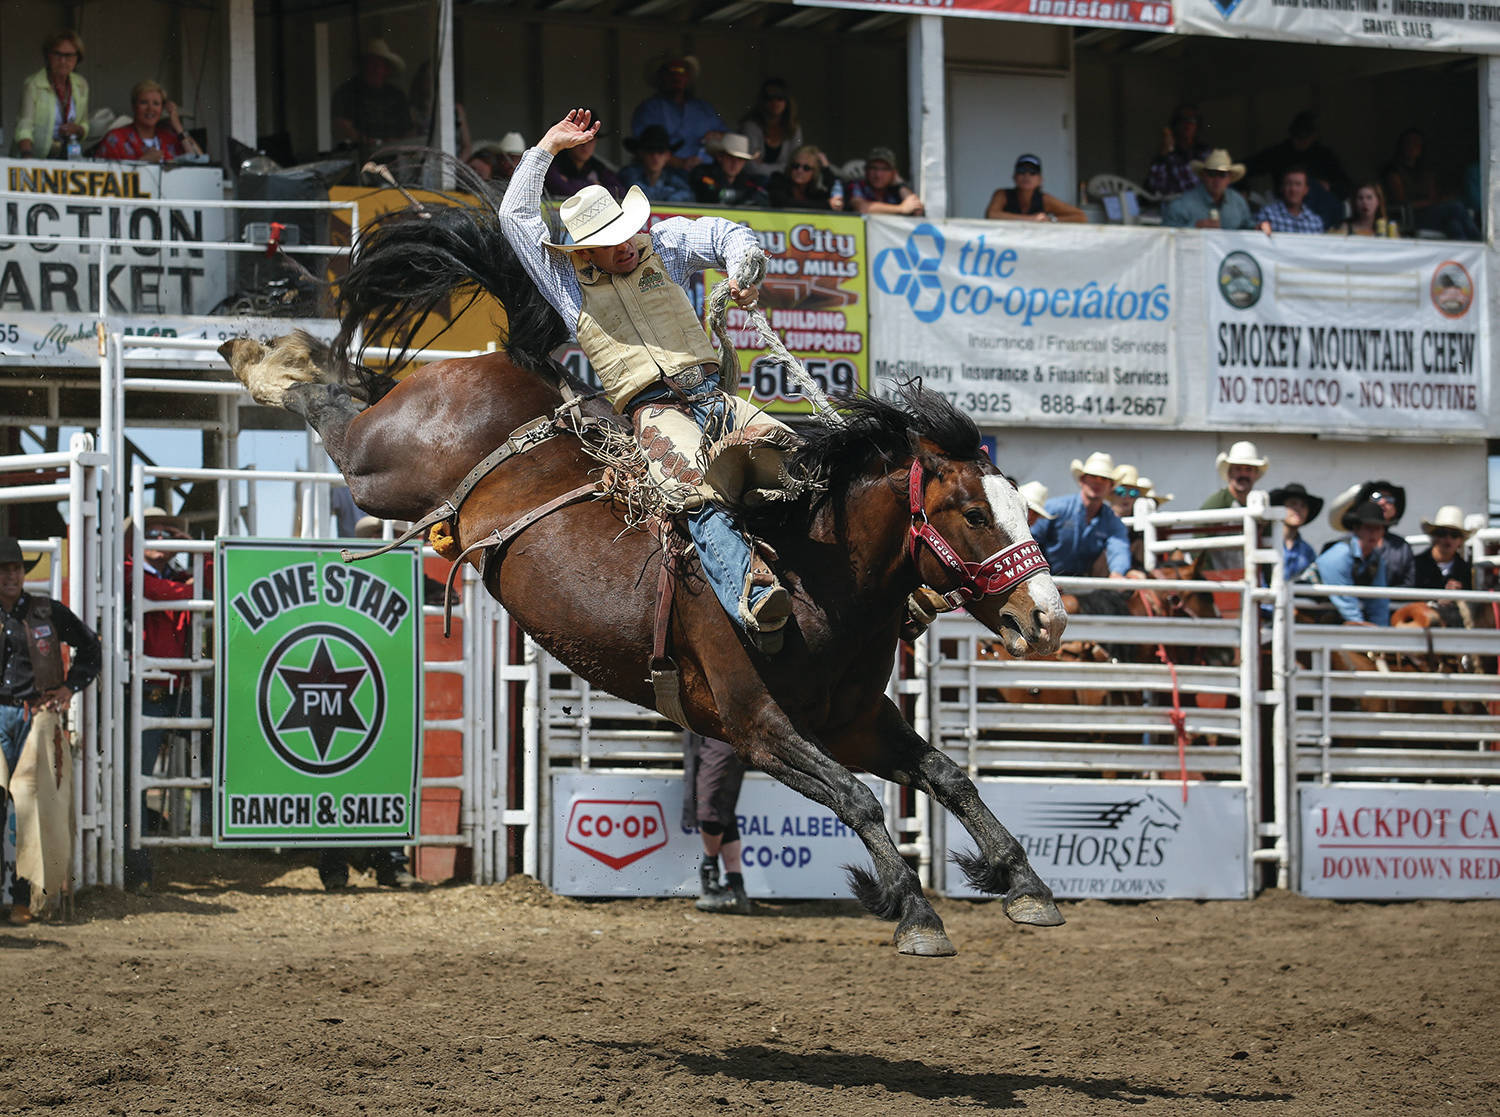 CHAMPION - Dusty Hausauer rode the Calgary Stampede’s Stampede Warrior to an 86 point ride to claim the championship in Saddle Bronc during the Innisfail Pro Rodeo at the Daines Rodeo Grounds last year. This year’s rodeo runs June 16th-18th.                                Express file photo